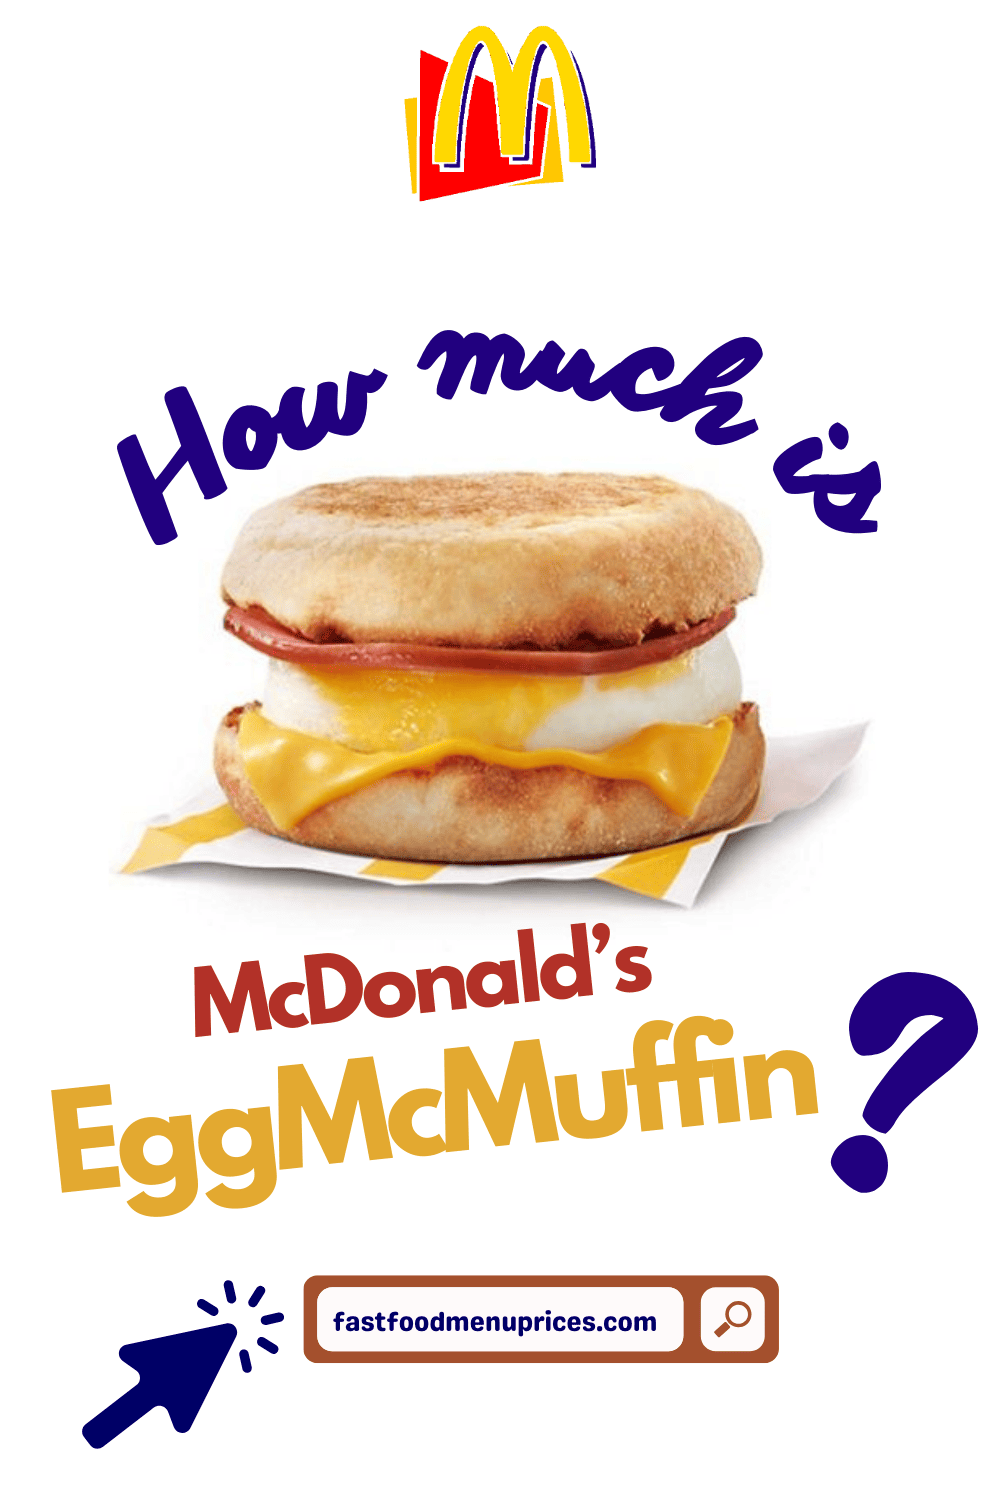 How much is McDonald's Egg McMuffin from their breakfast menu?